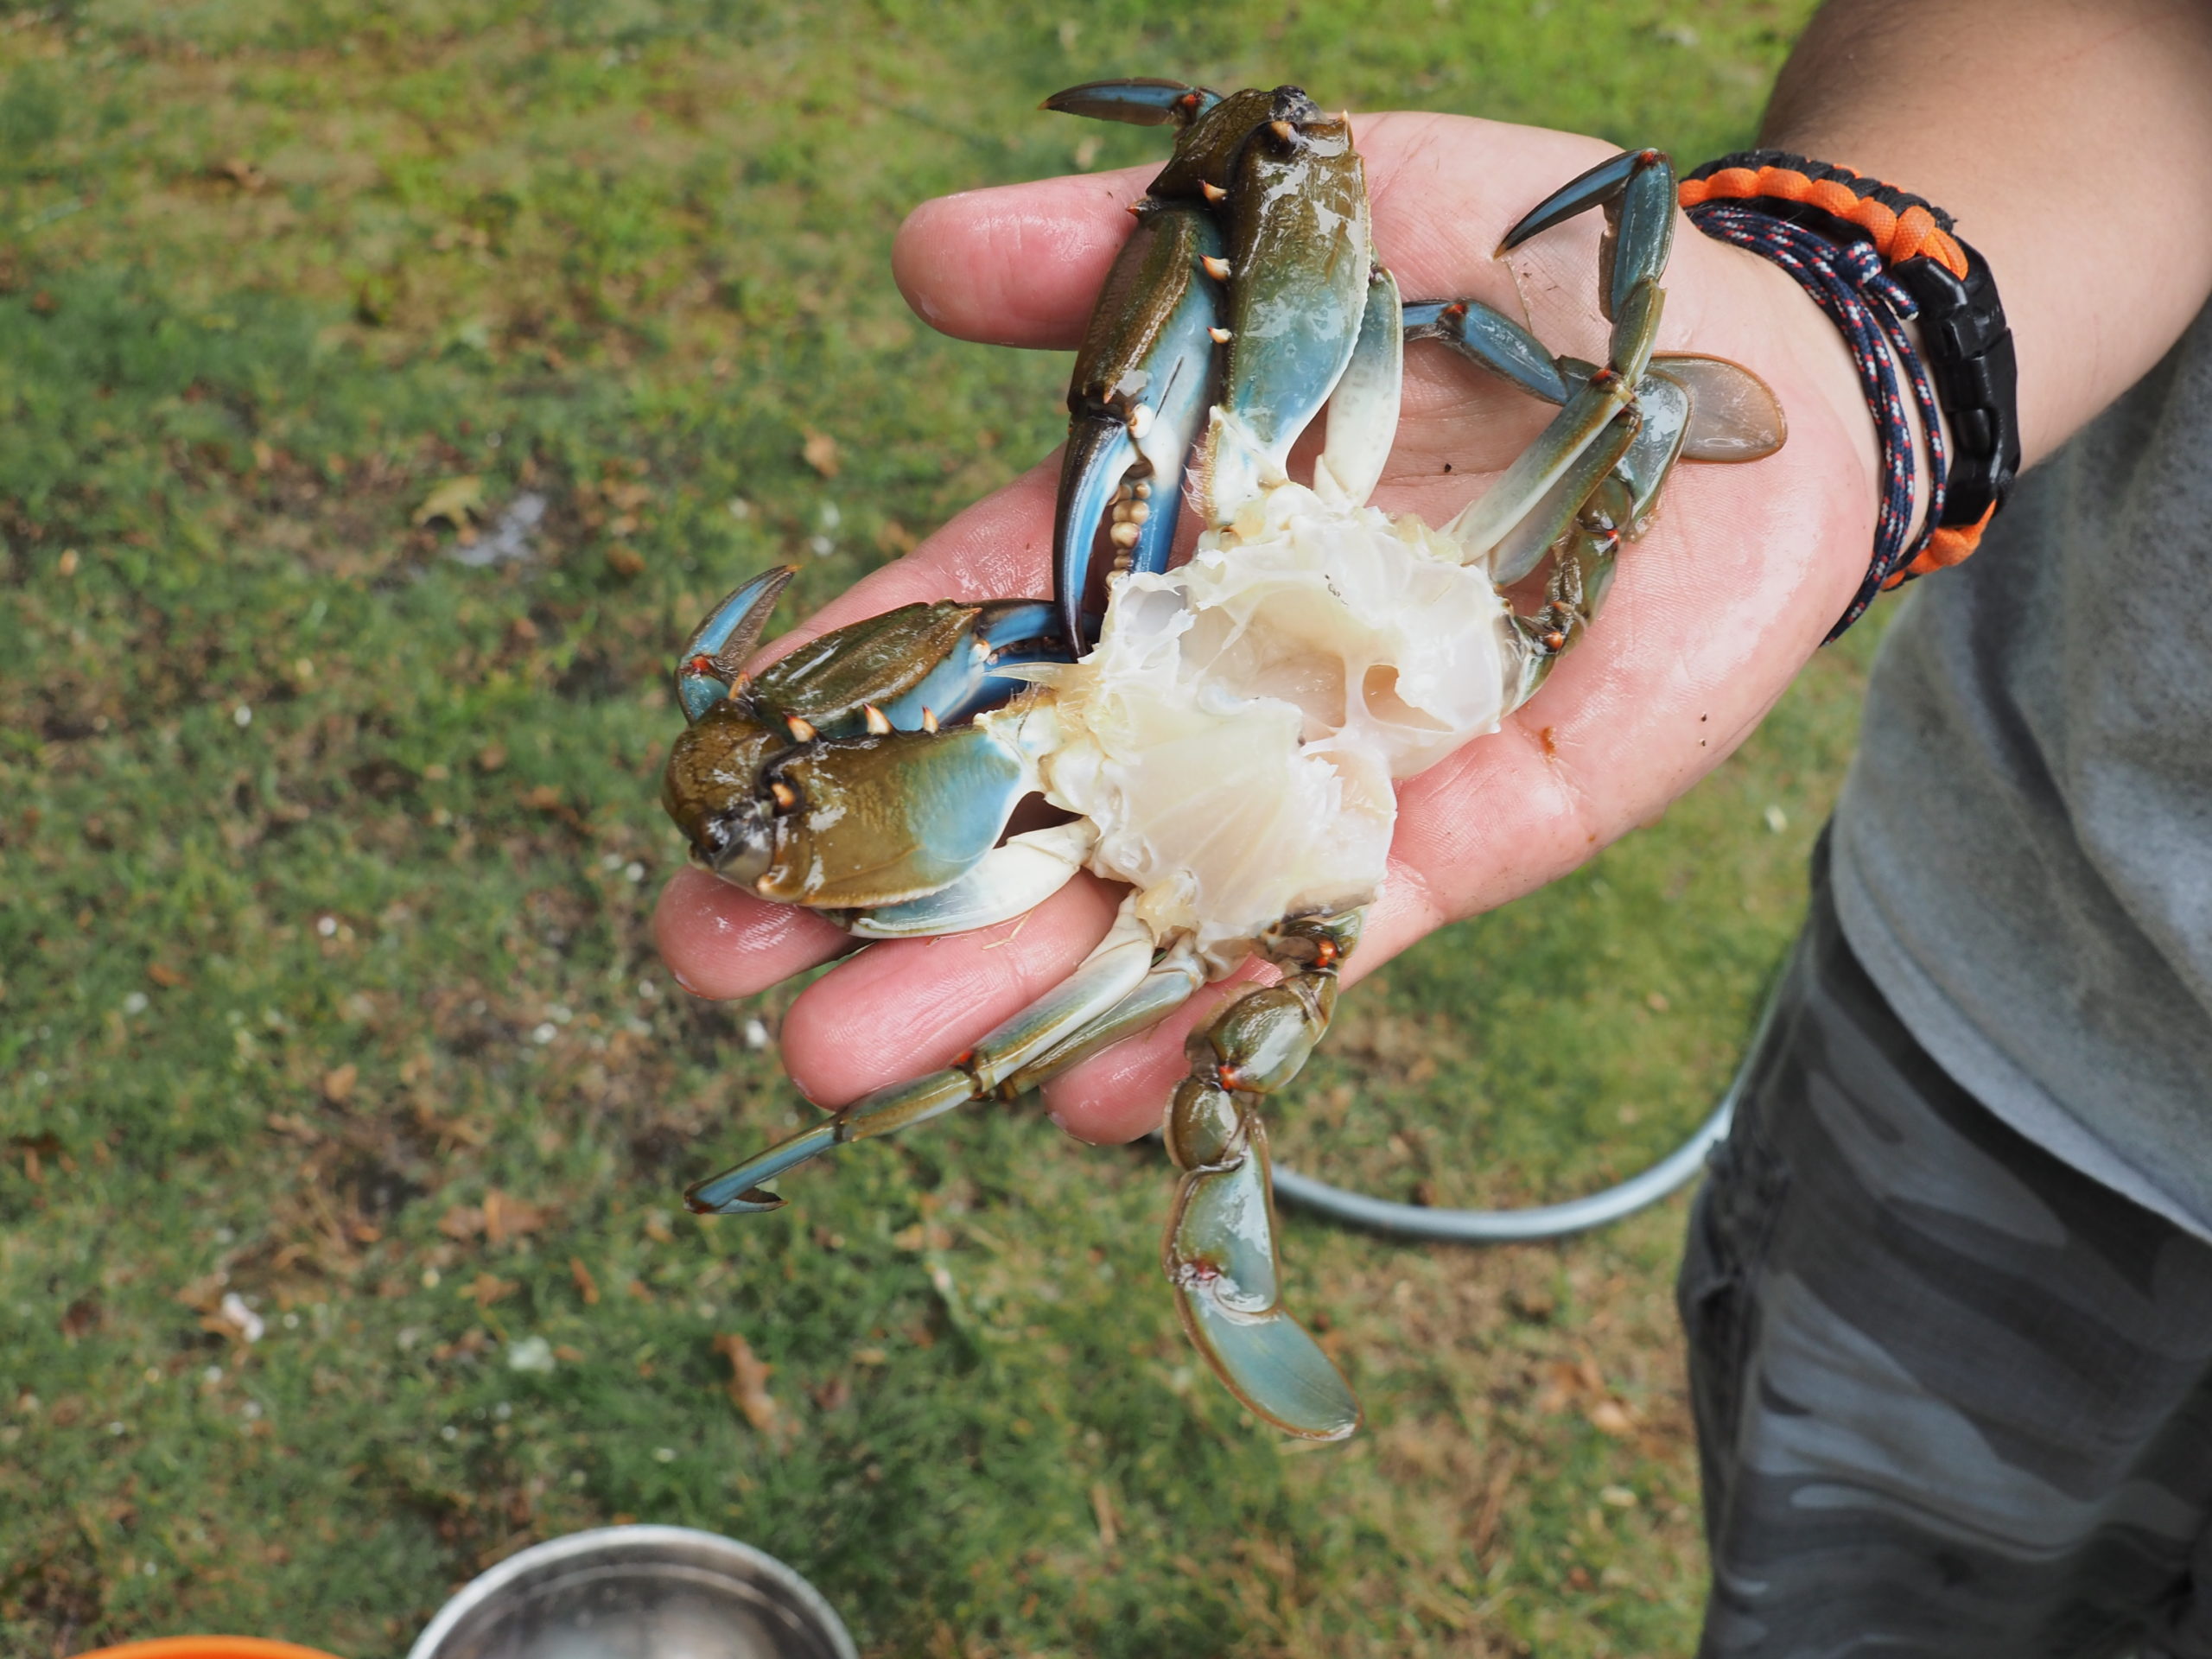 Ultimate Crab Snare Gear Review! Get Prepped for 'Crab Fishing